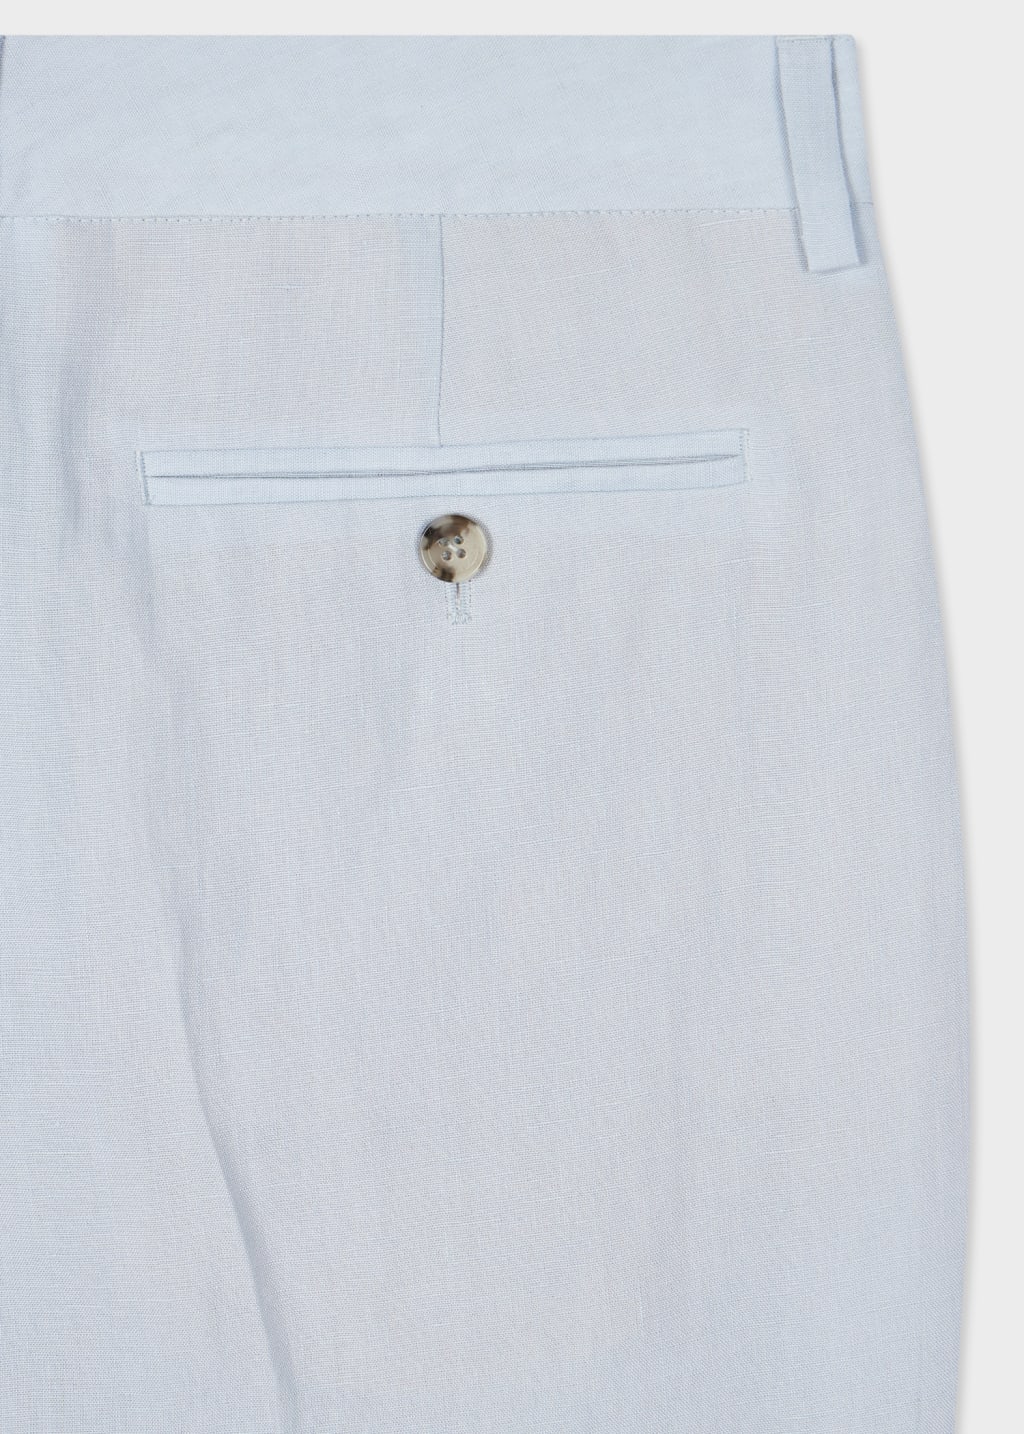 Detail View - Women's Pale Blue Linen Tapered Trousers Paul Smith